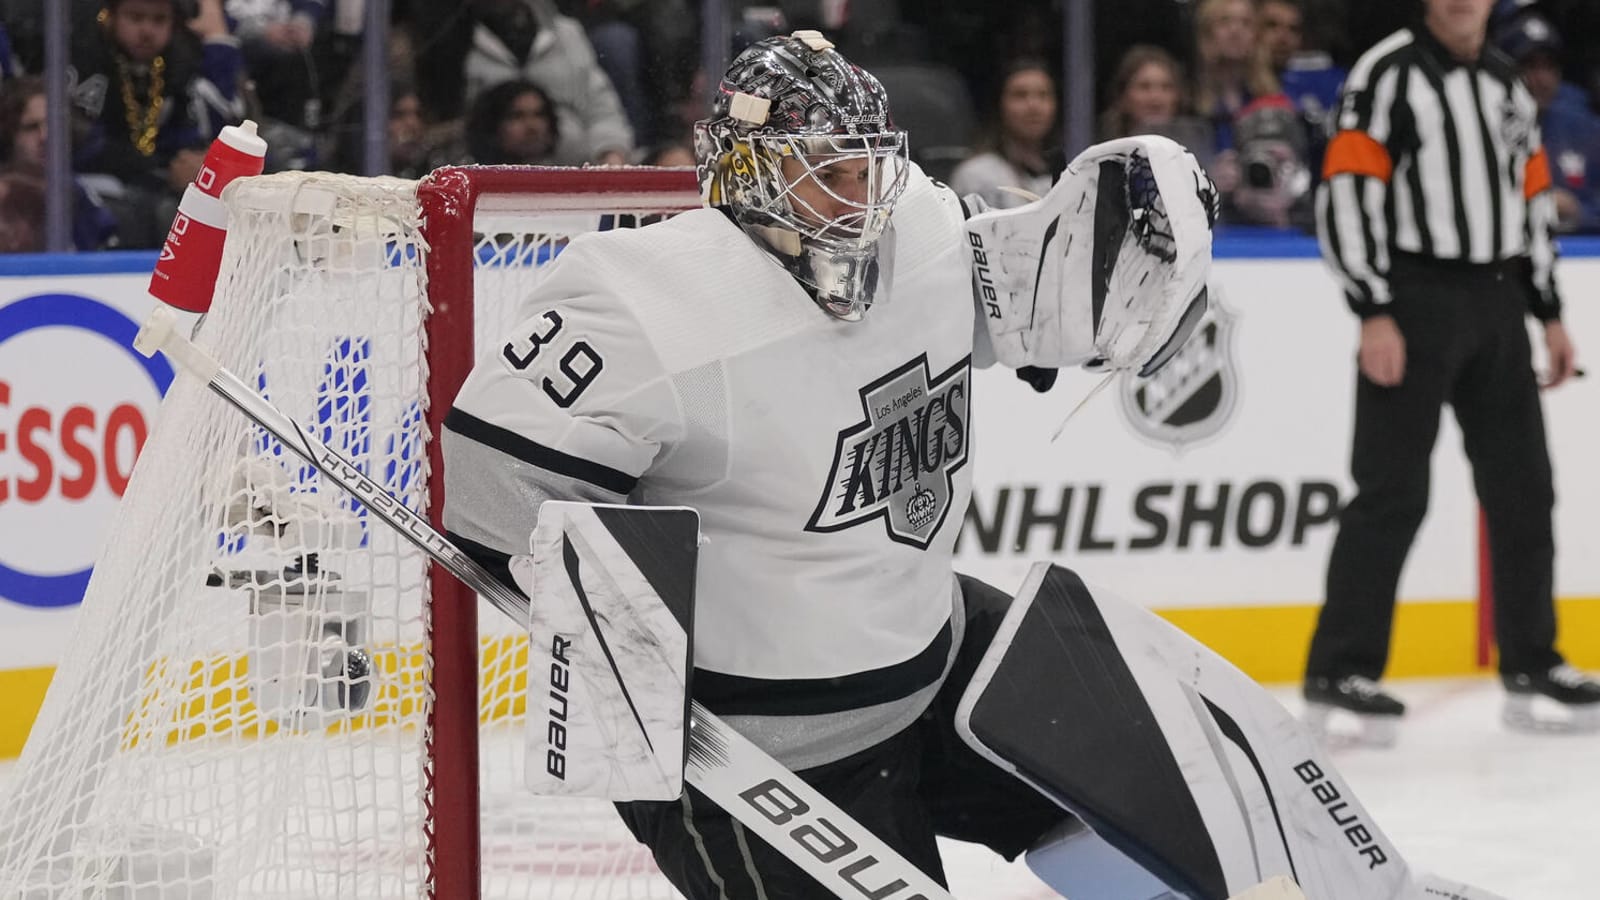 With Cam Talbot thriving, the Kings look dangerous